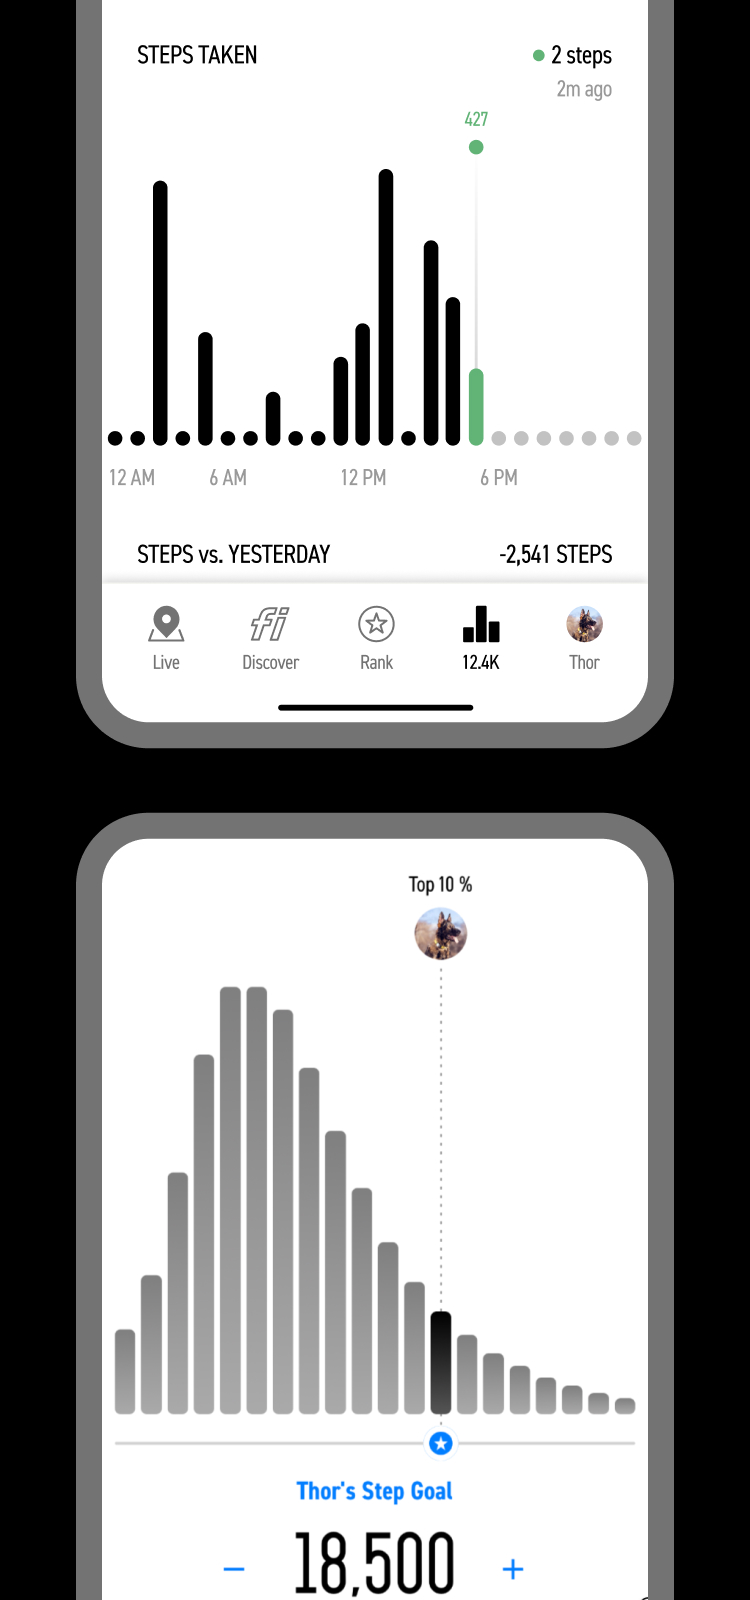 The fitness tracking and competition features of the Fi app